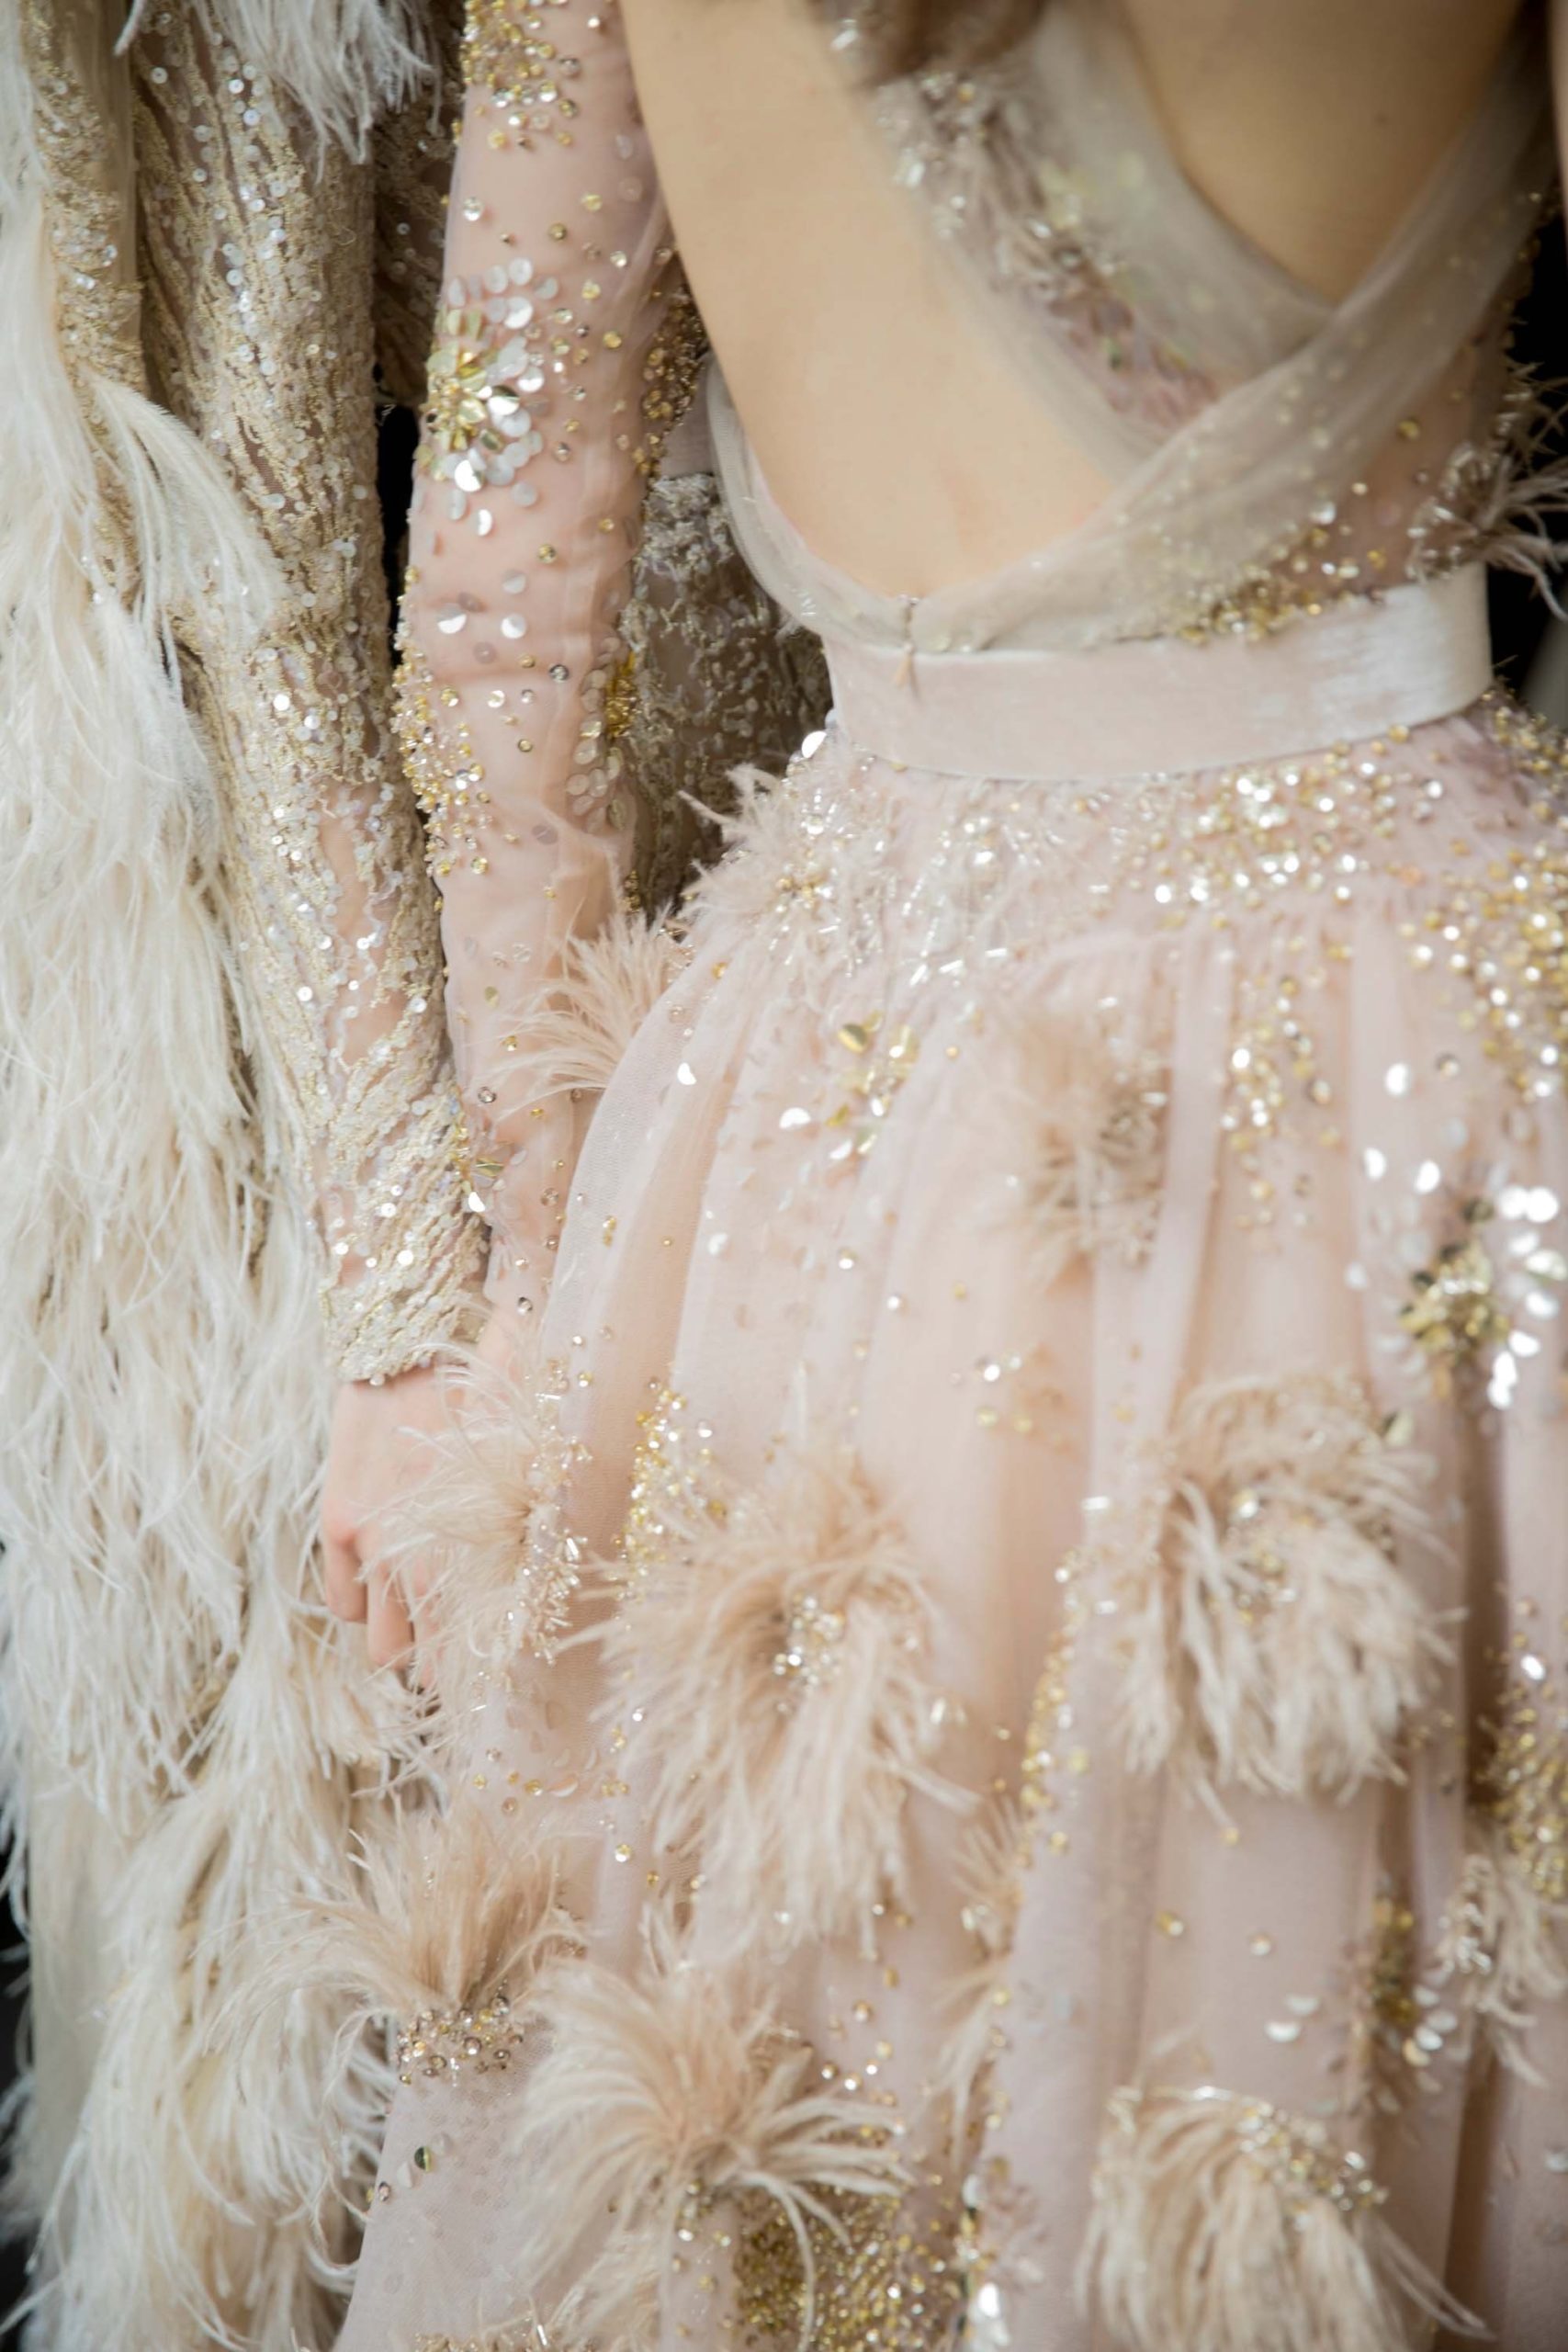 Today we're talking all about texture and design in the scope of wedding planning, and these haute couture wedding dresses by Elie Saab with ostrich feather accents are the picture perfect example of why this design element makes all the difference in the world #hautecouture #eliesaab #runwayinspiration // Willow & Oak Events